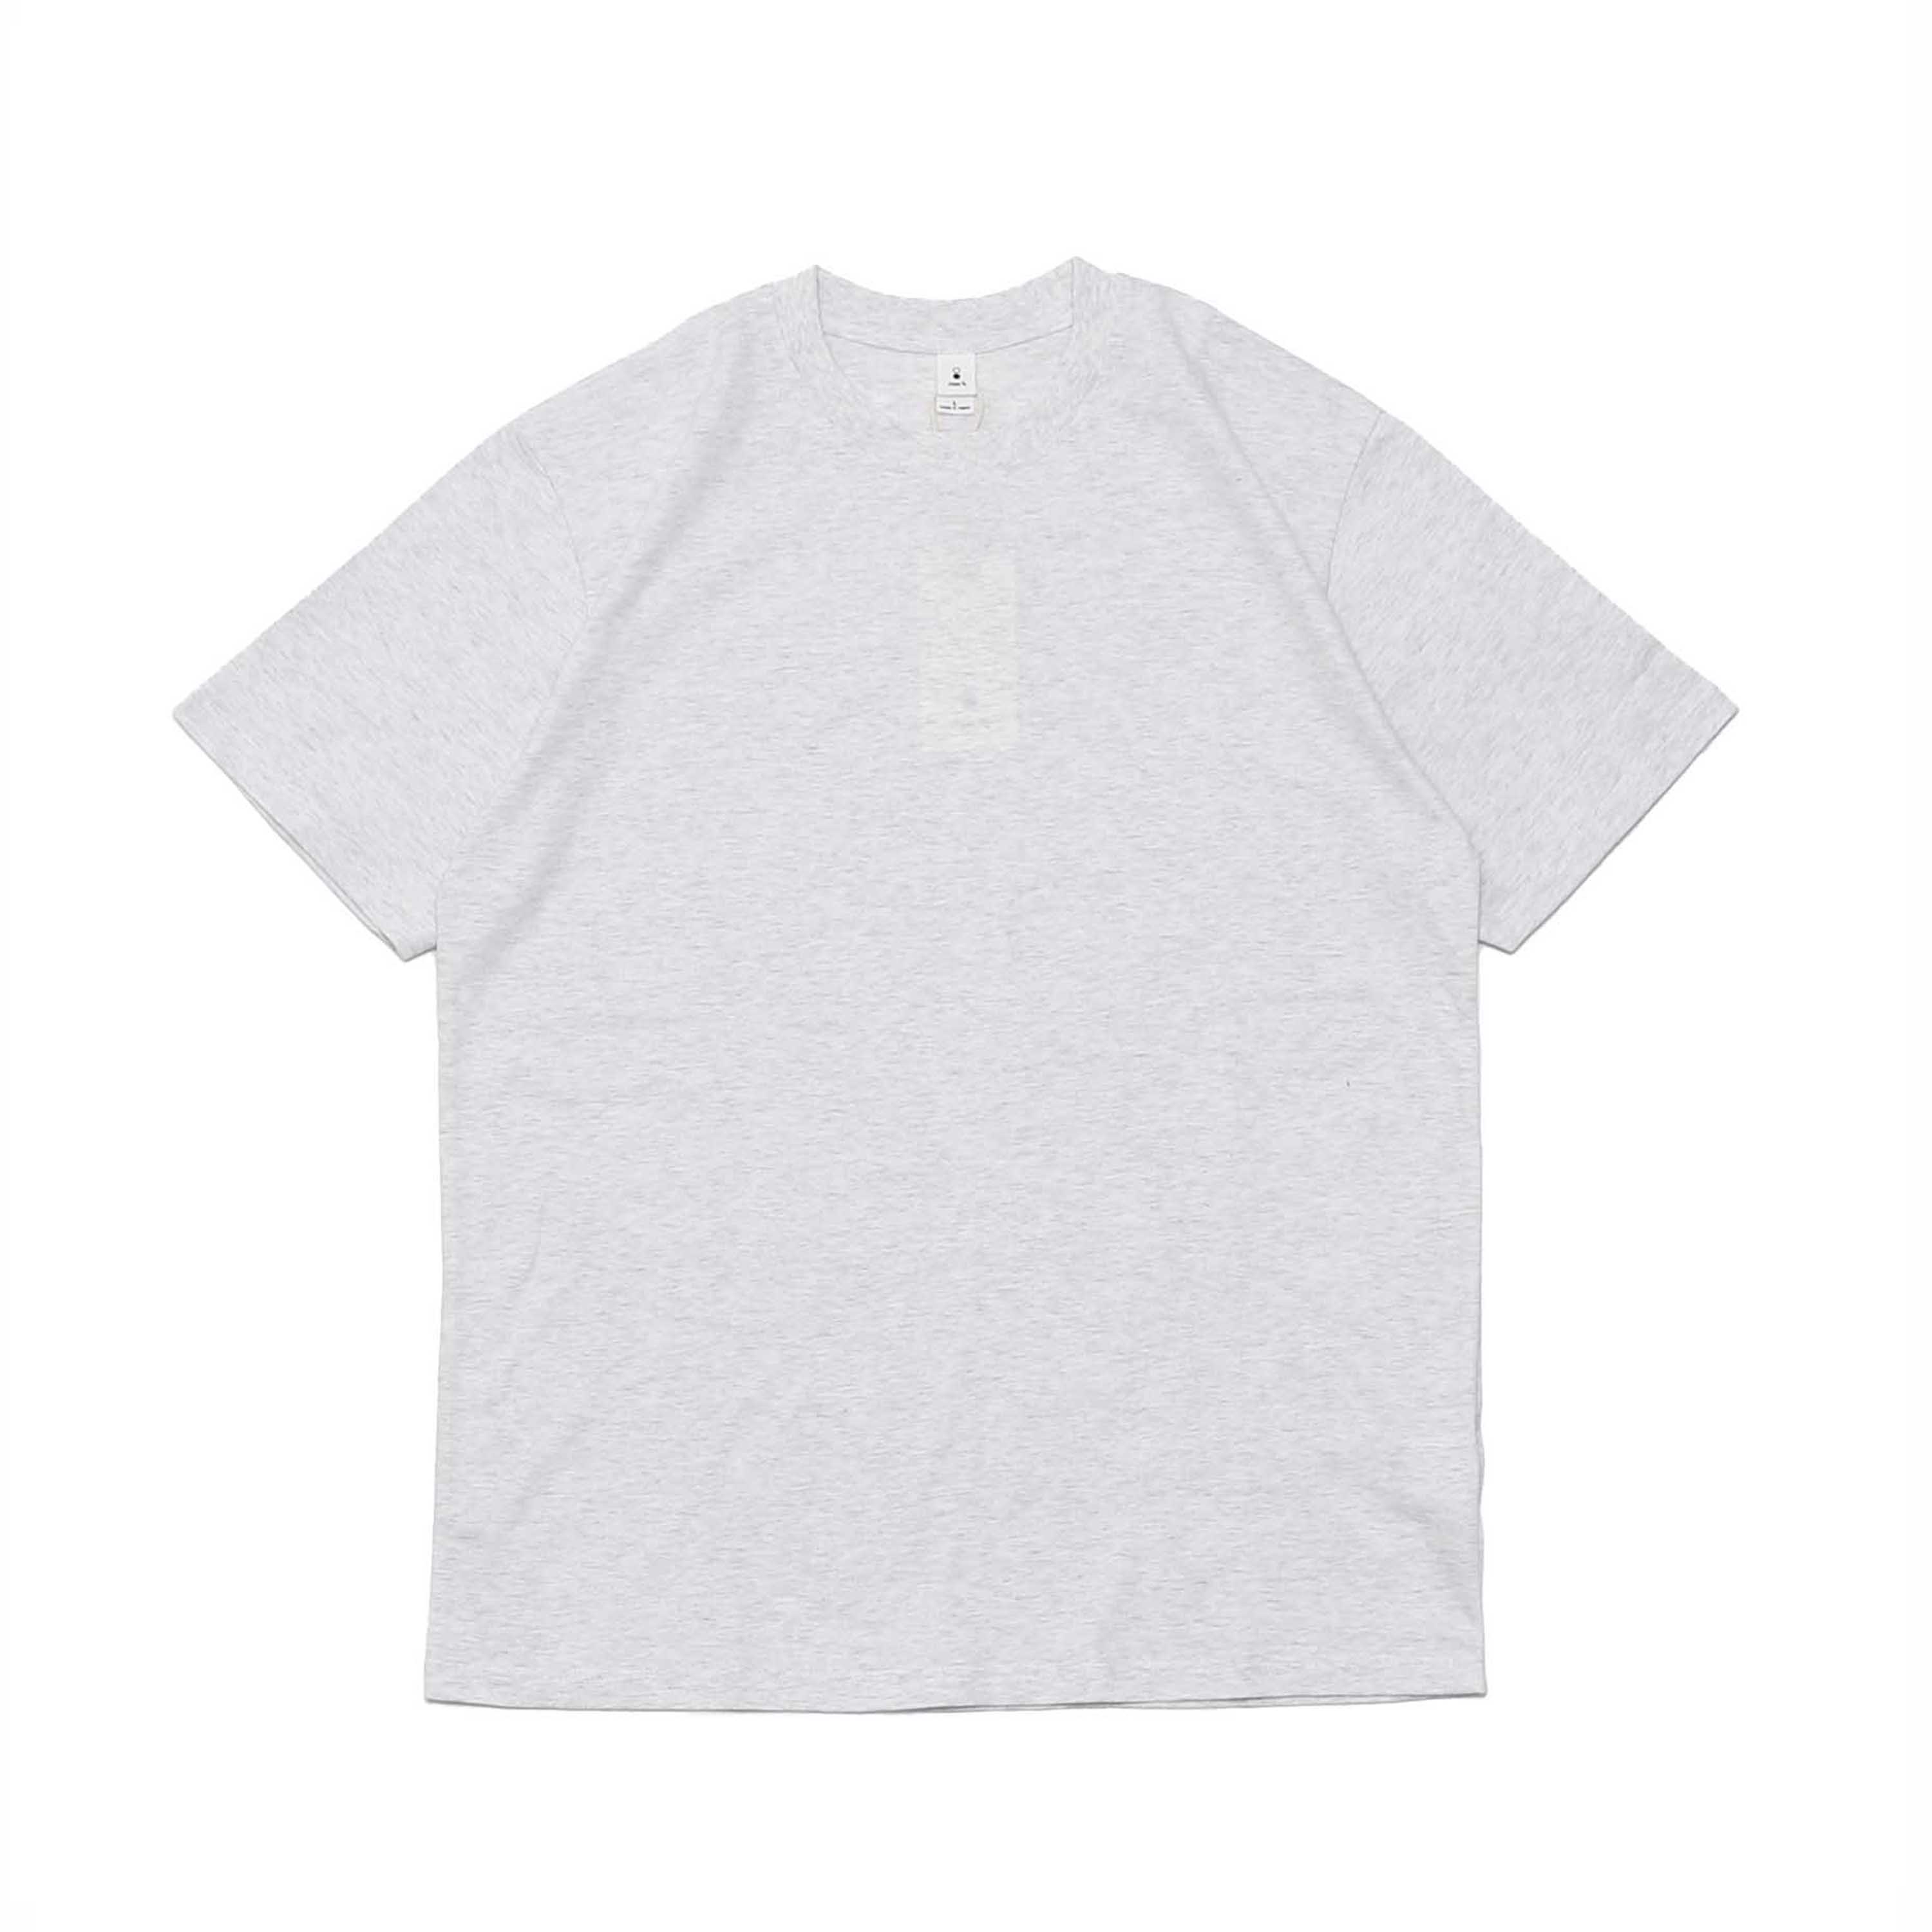 STANDARD FIT S/S TEE(M10-100) - WHITE